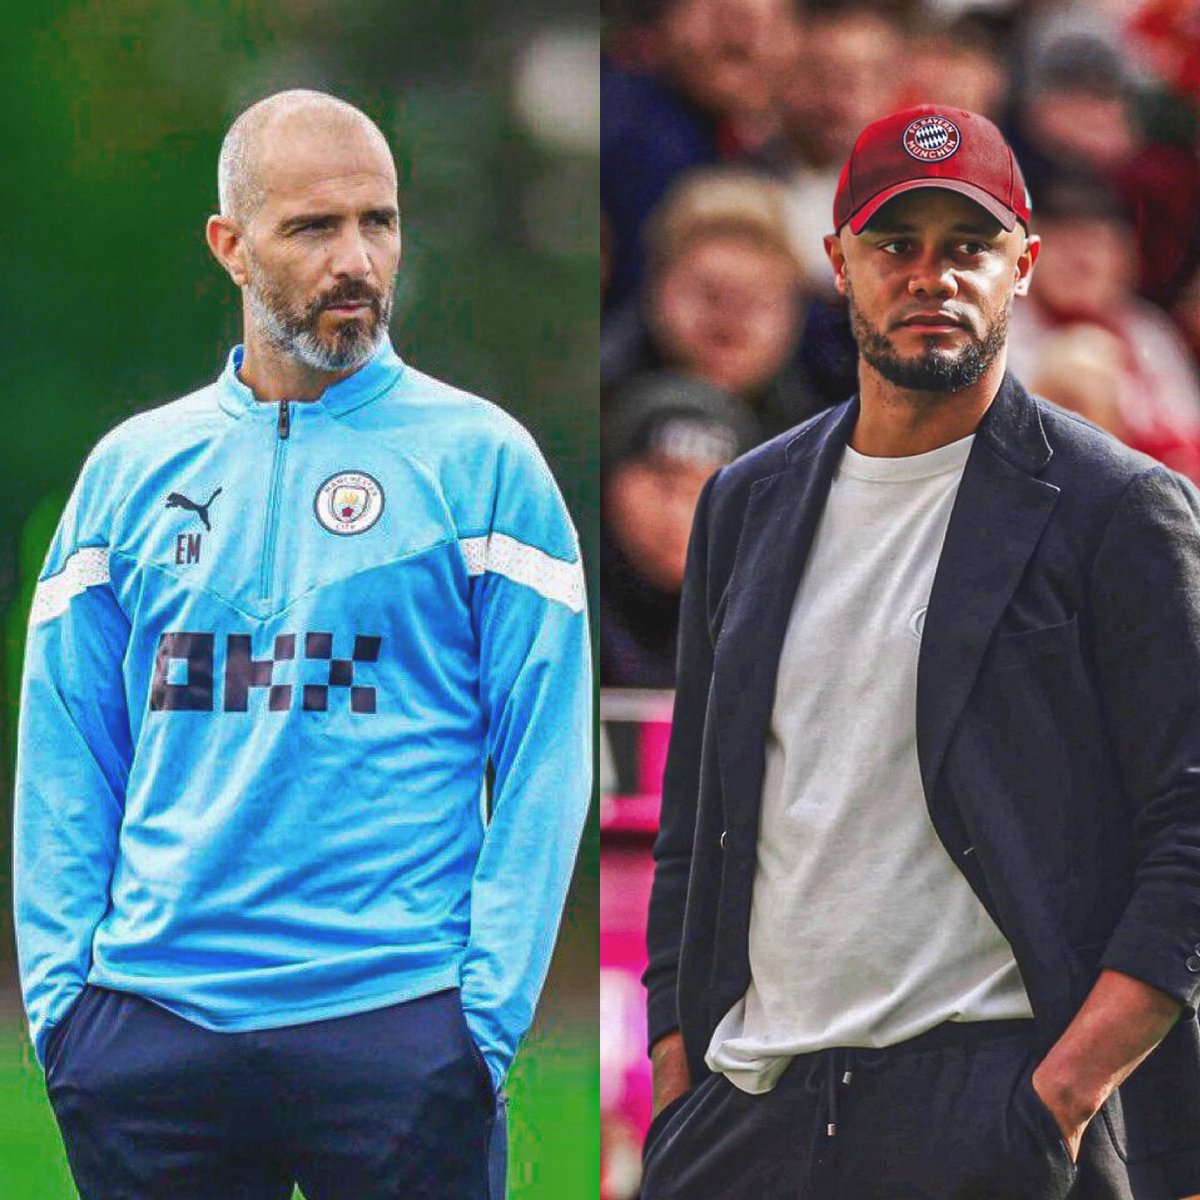 Bayern and Chelsea think we can’t see them: • Sack experienced manager • Find a manager that worked with Pep • Find a manager that is bald • Find a manager that coached in the Championship These clubs had the same checklist 😭